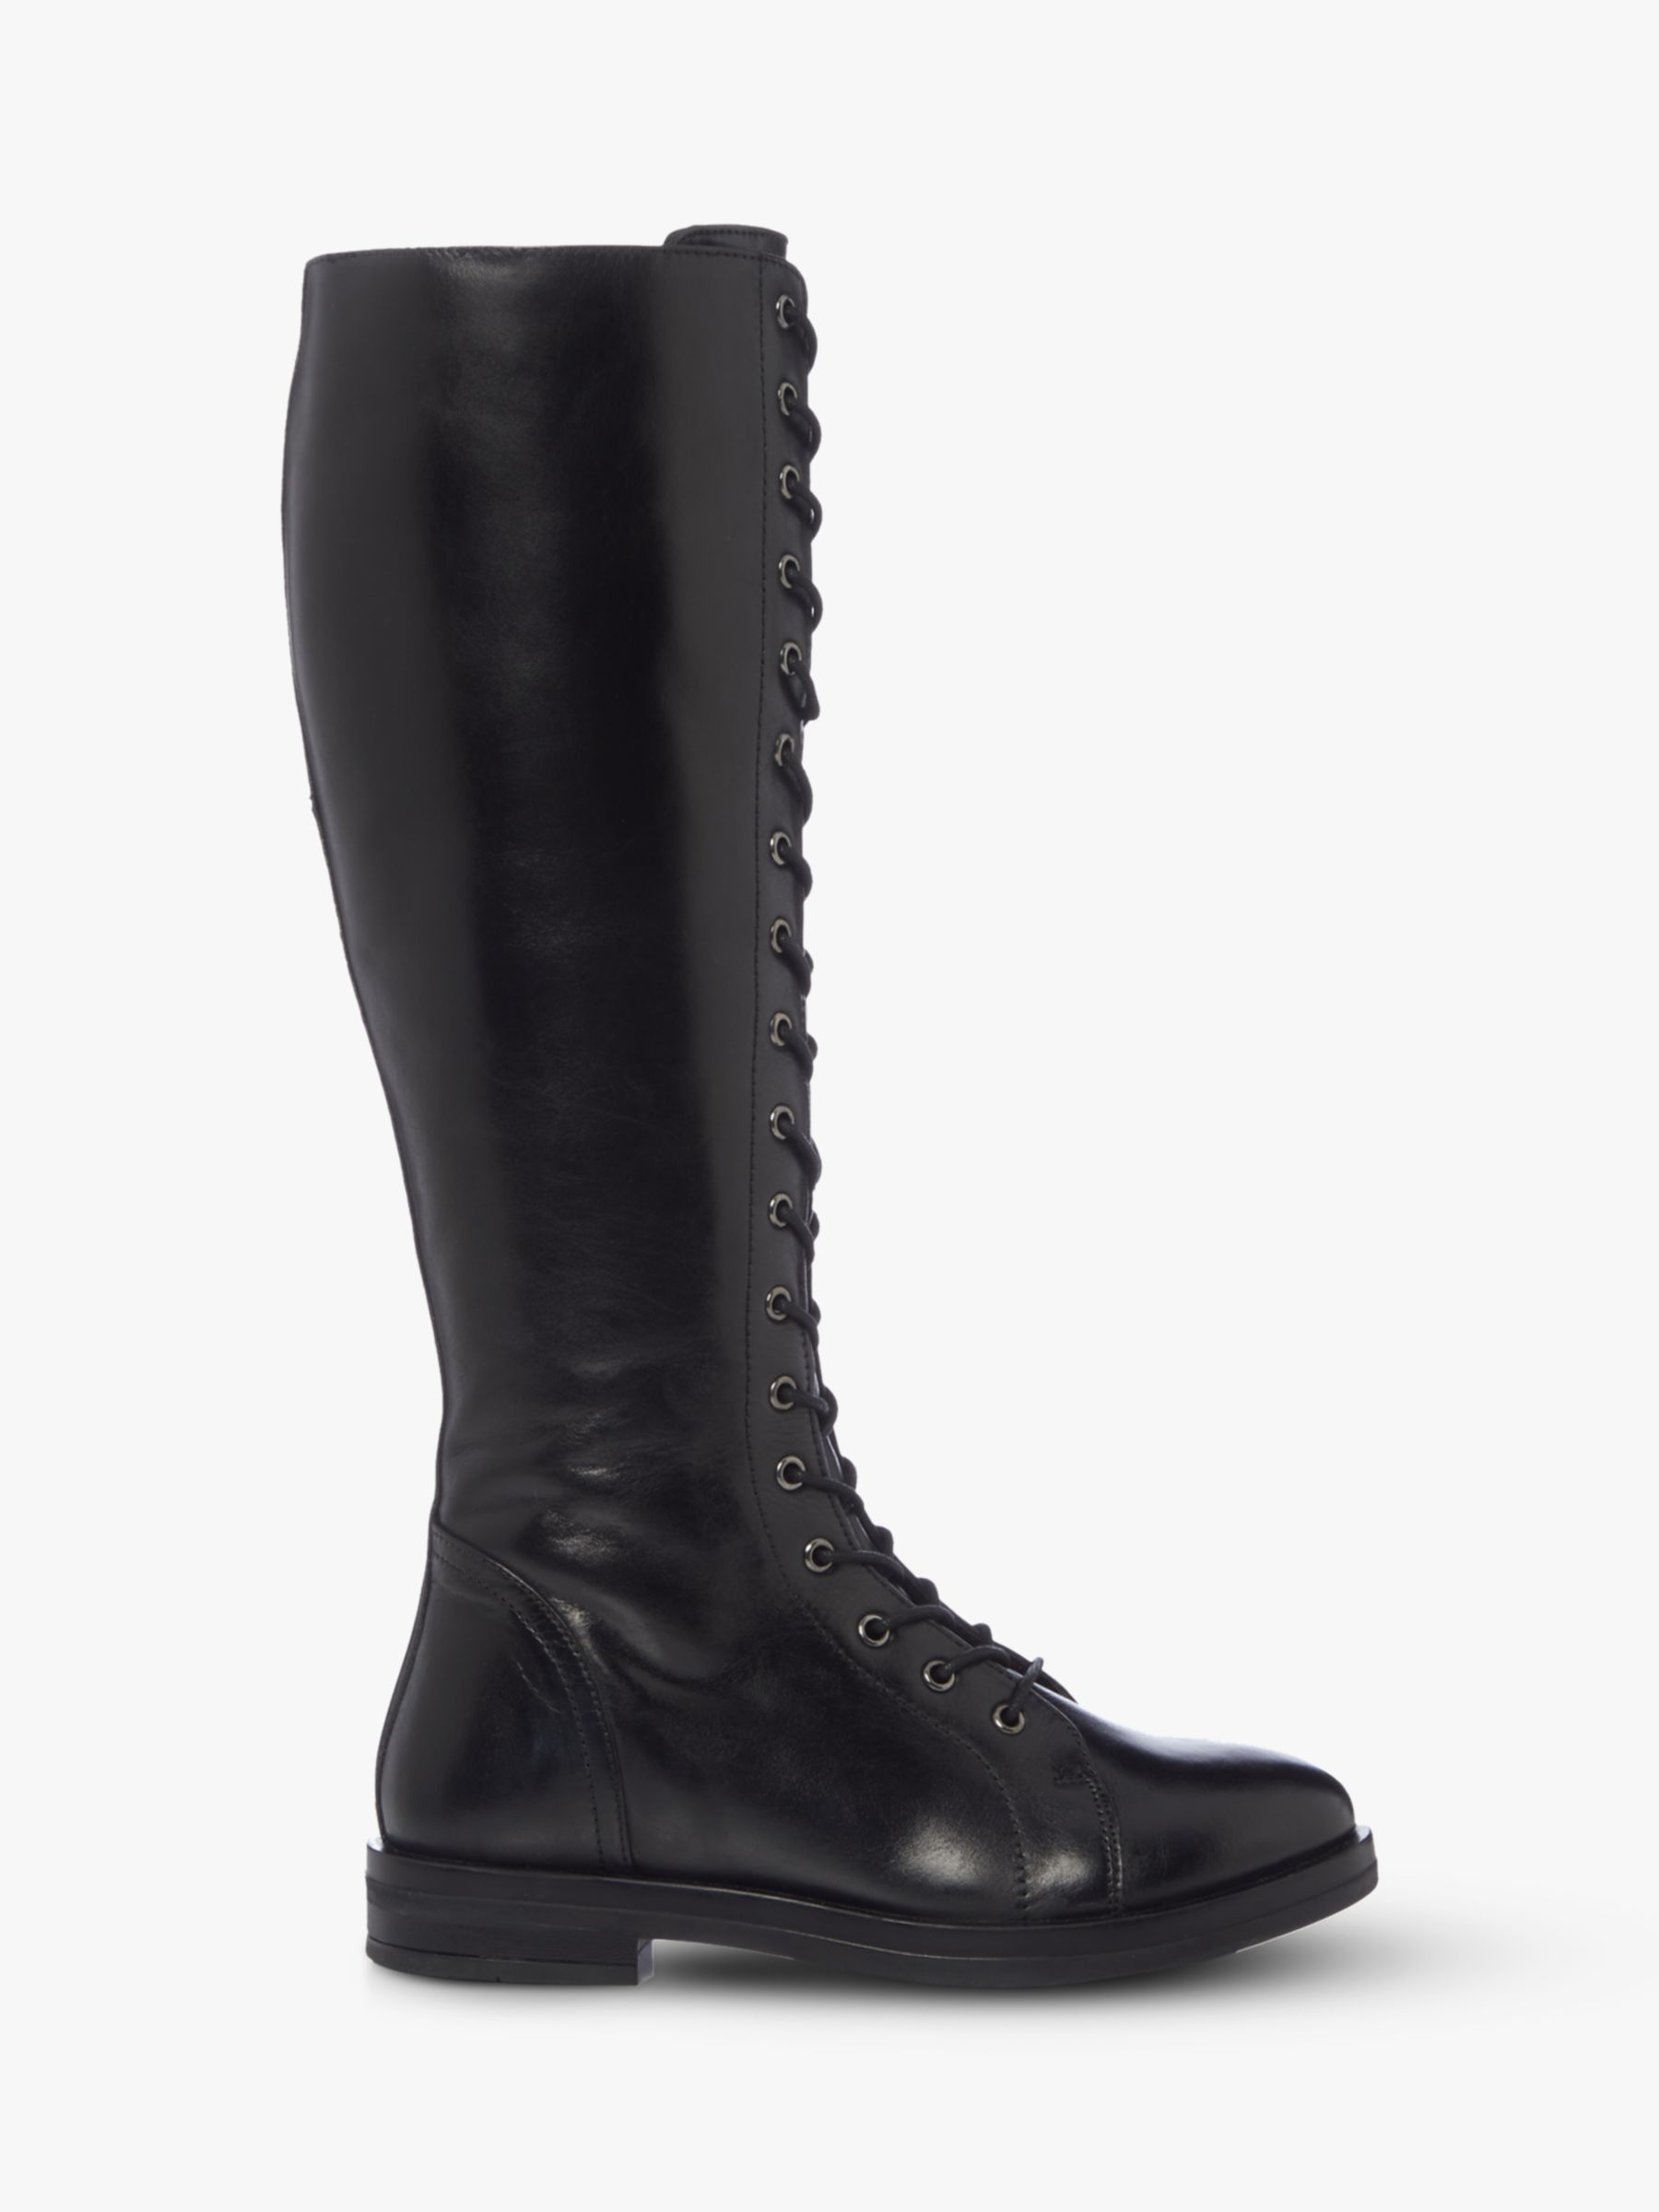 Bertie Thimble Leather Lace Up Knee High Boots, Black at John Lewis ...